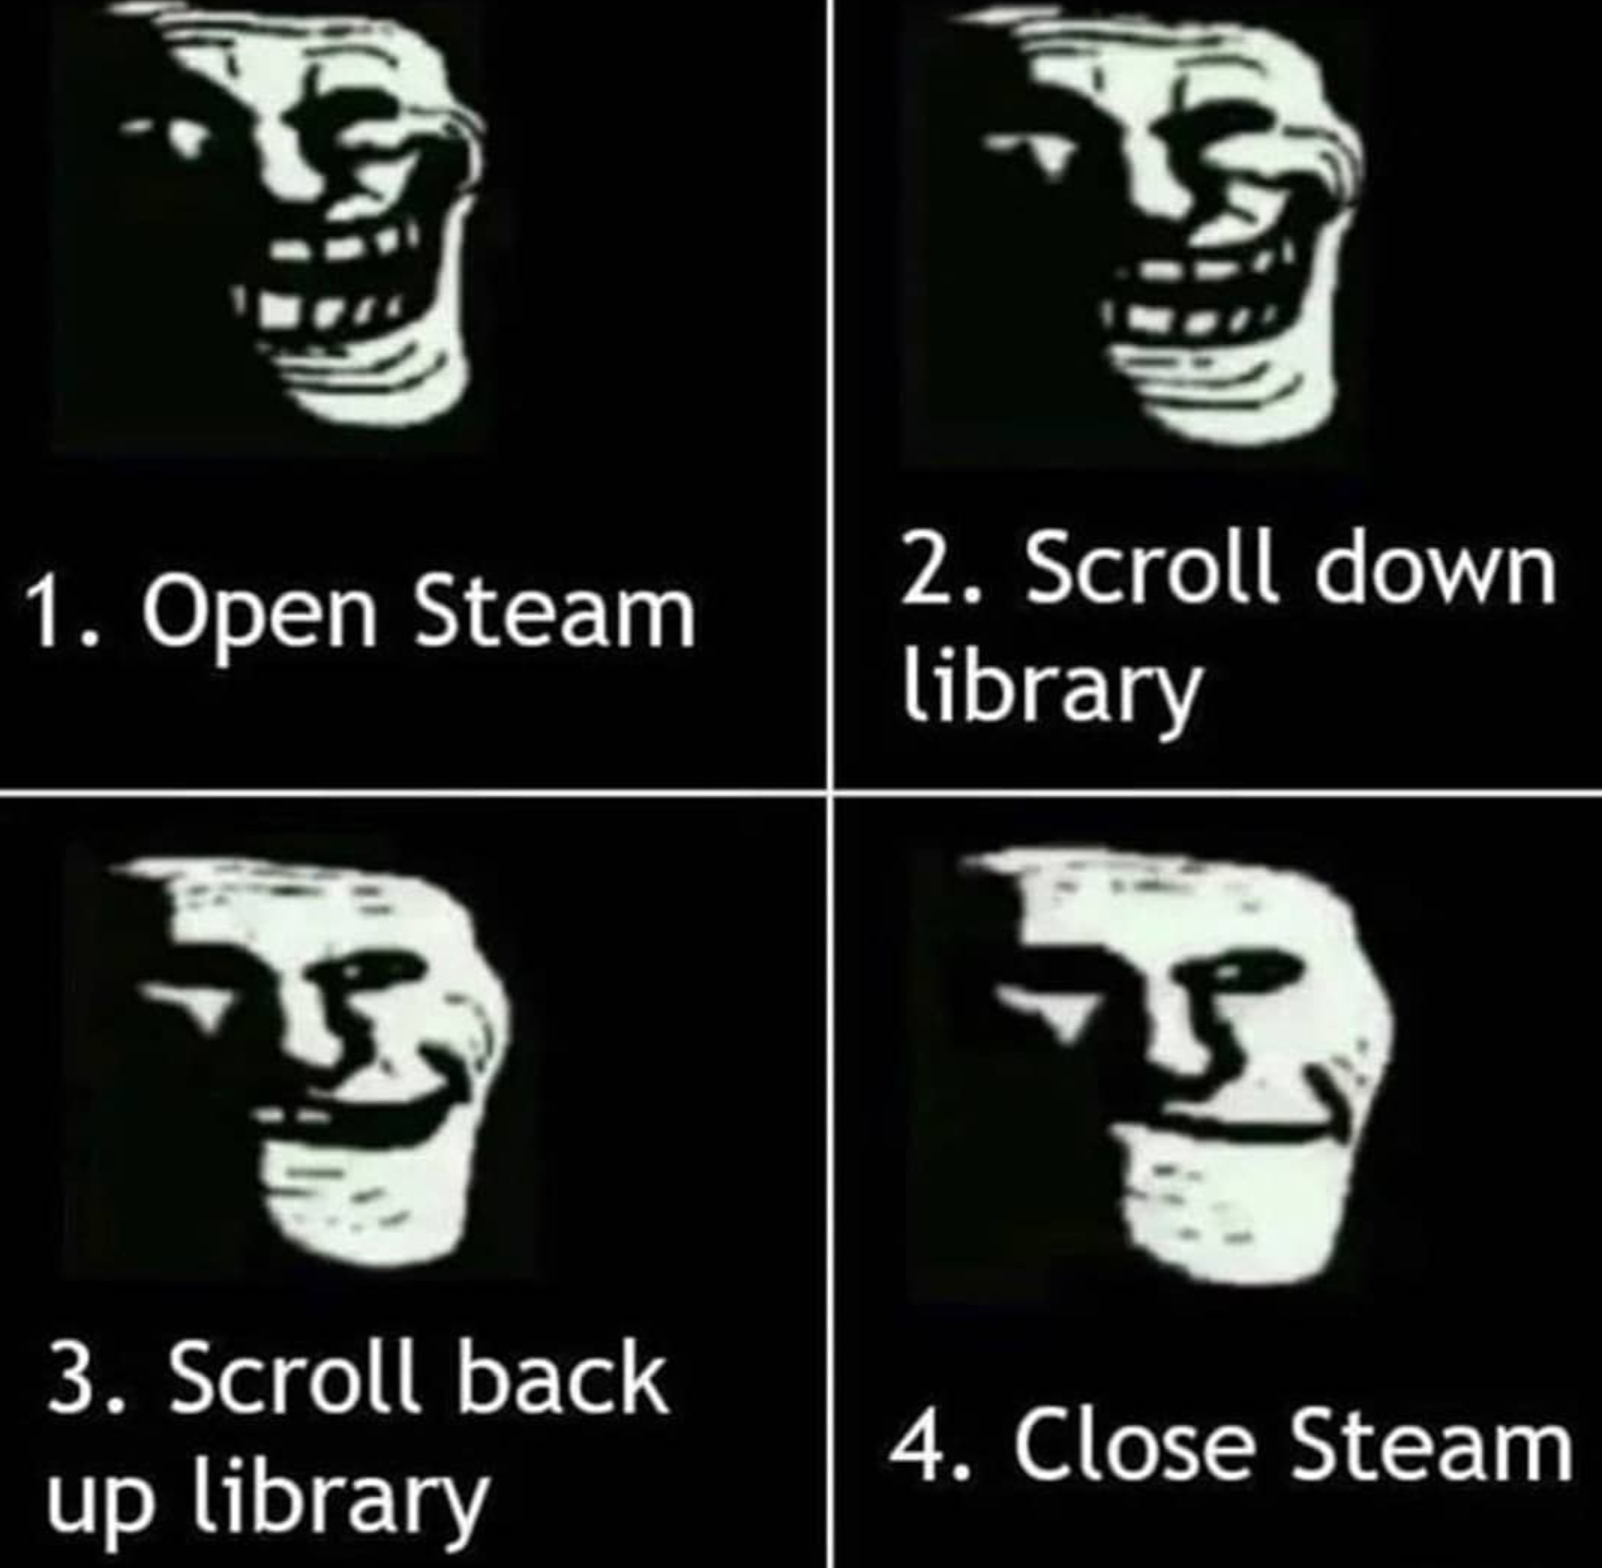 funny gaming memes - can t i remember my daughter's name - 1. Open Steam 2. Scroll down library 3. Scroll back up library 4. Close Steam